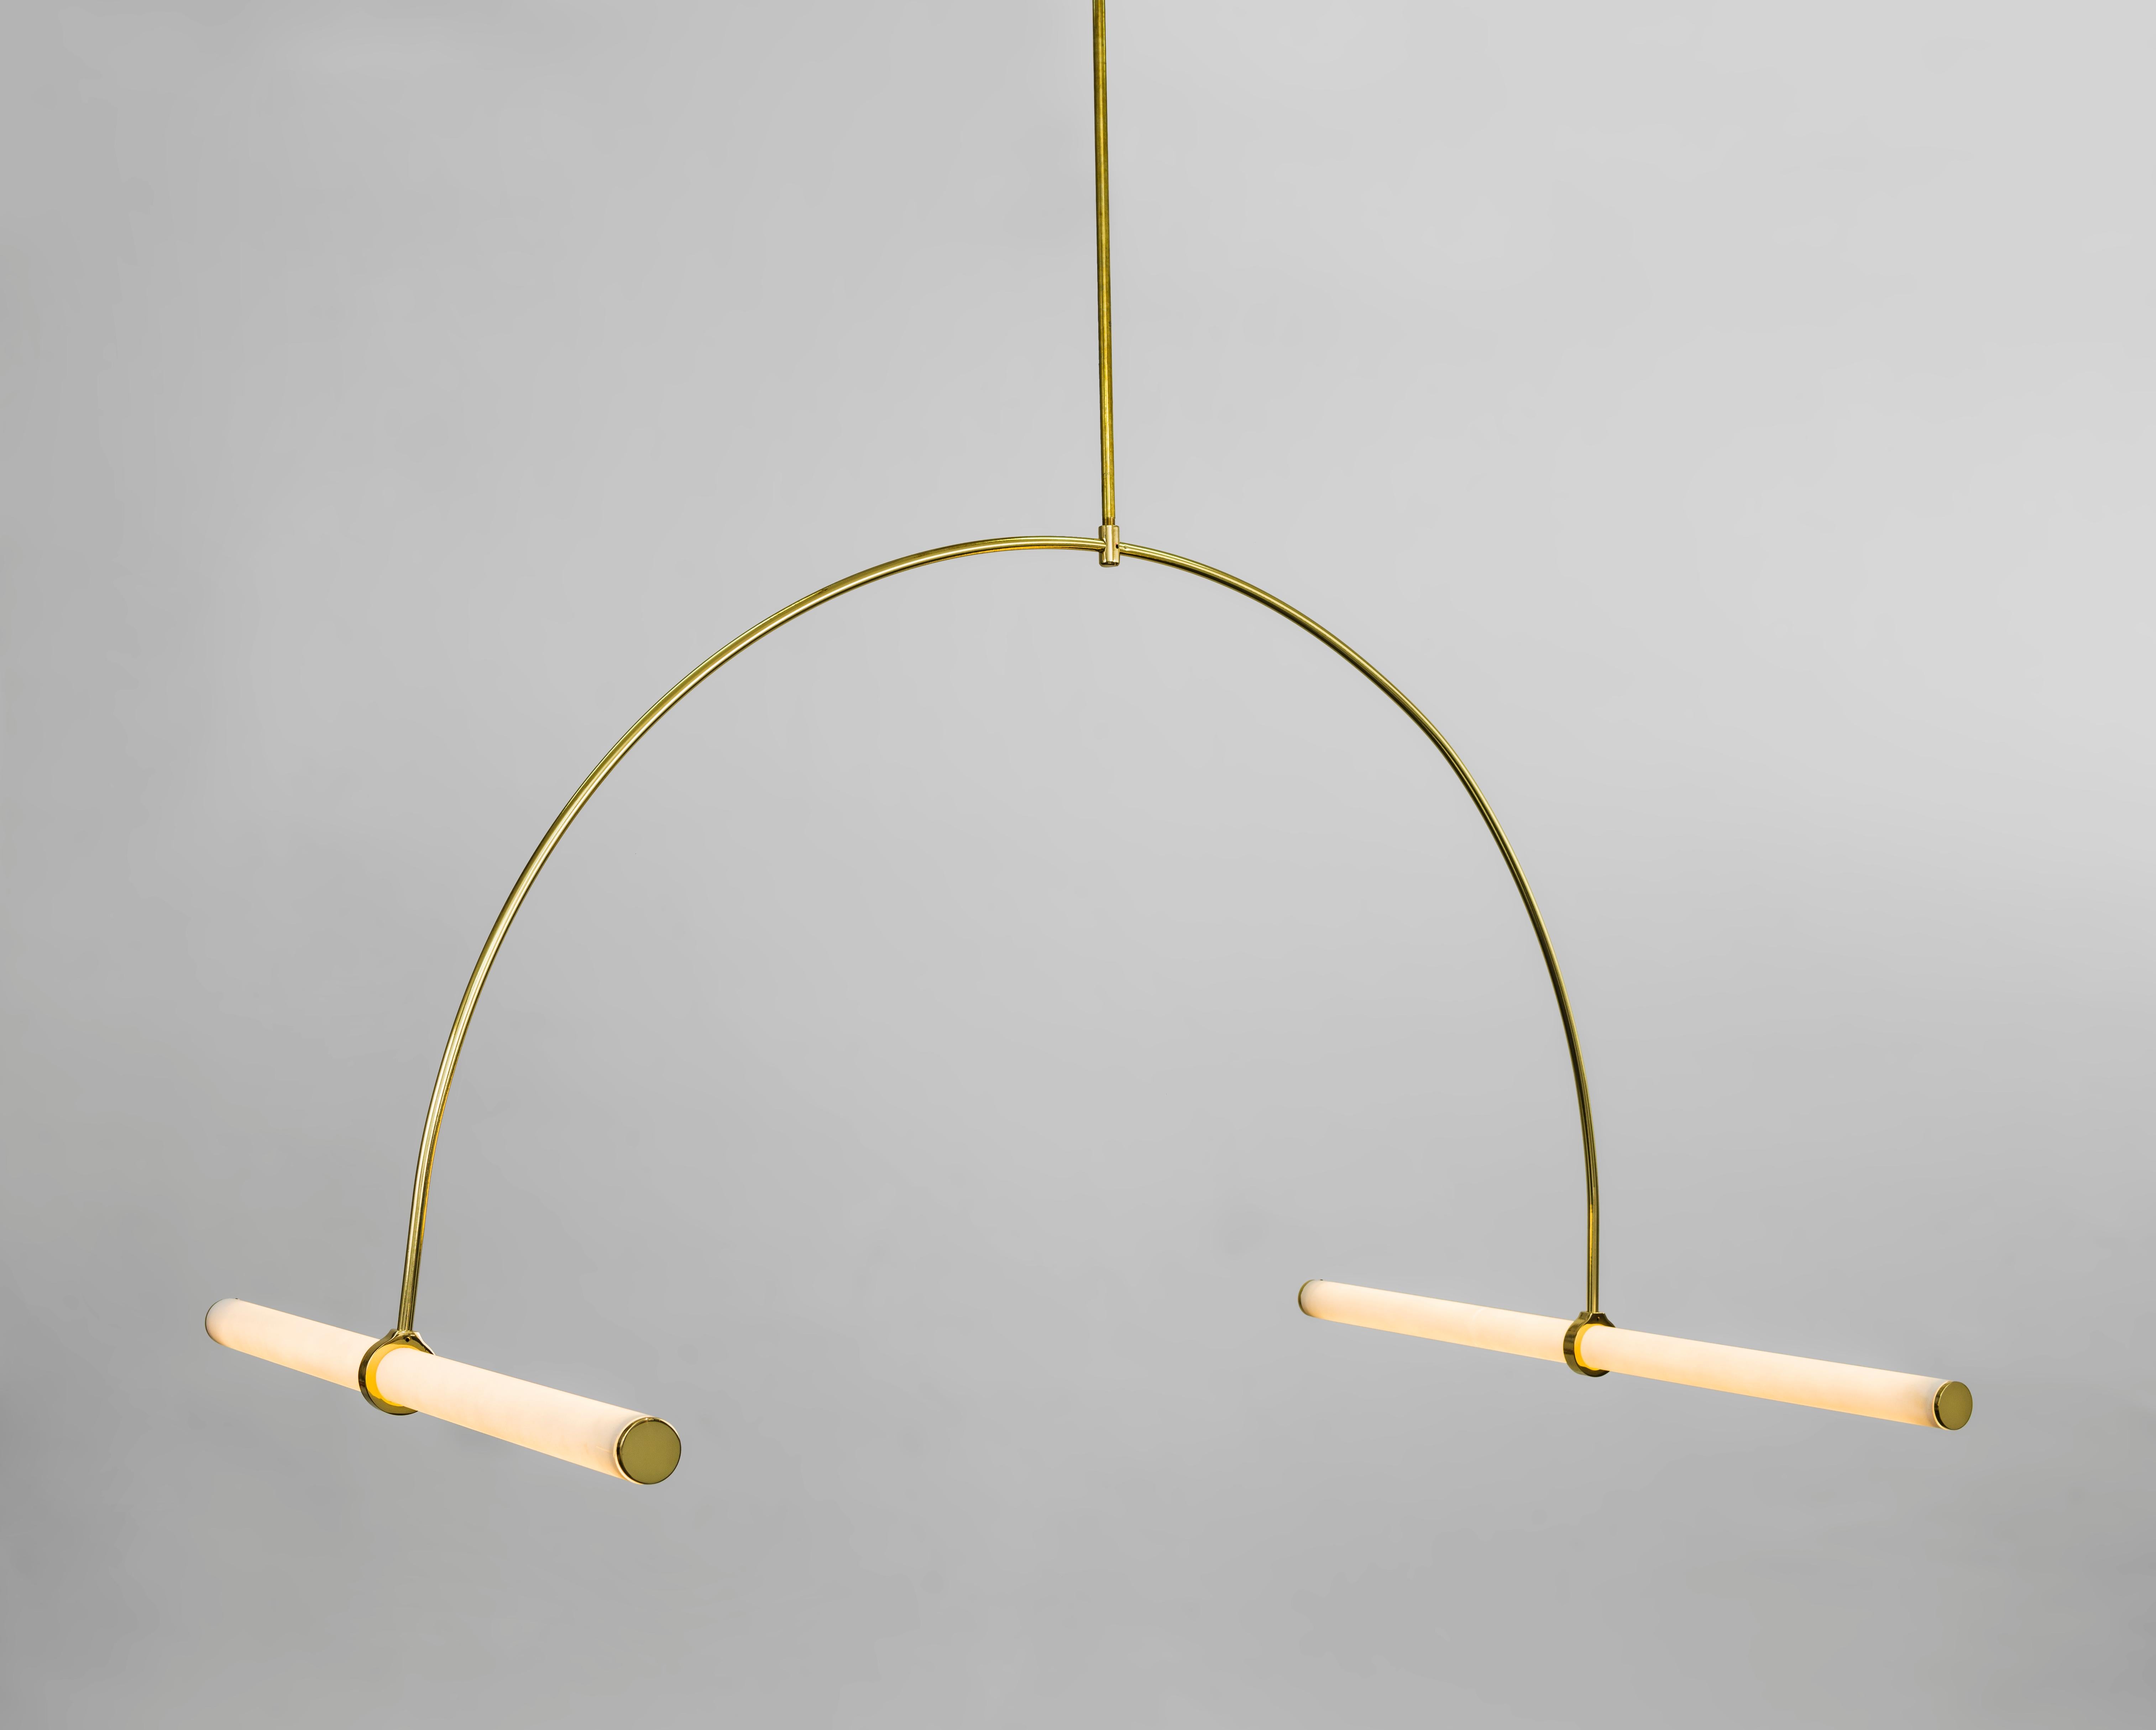 Tube pendant No. 1 by Naama Hofman
Dimensions: W 106, H 124 cm (height to order)
Light tube diameter: 35 mm
Brass pipe diameter: 10 mm
Number of light tubes: 2
Voltage: 110-240
CE Approved
Material : Polished Brass pipe, Acrylic tube, LED